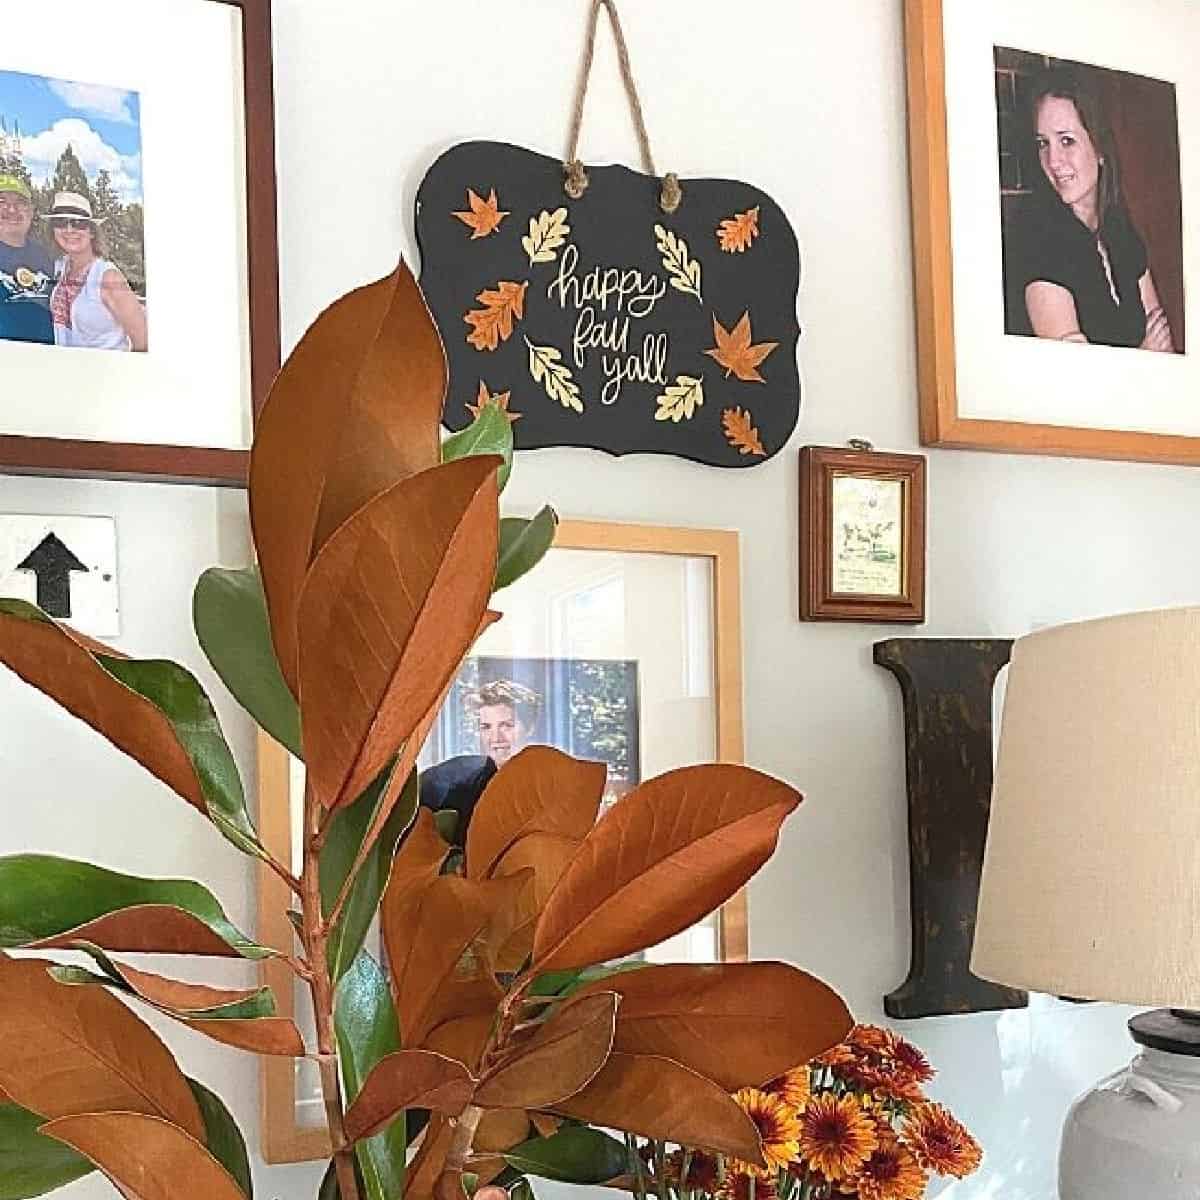 DIY fall sign hanging on wall with other pictures